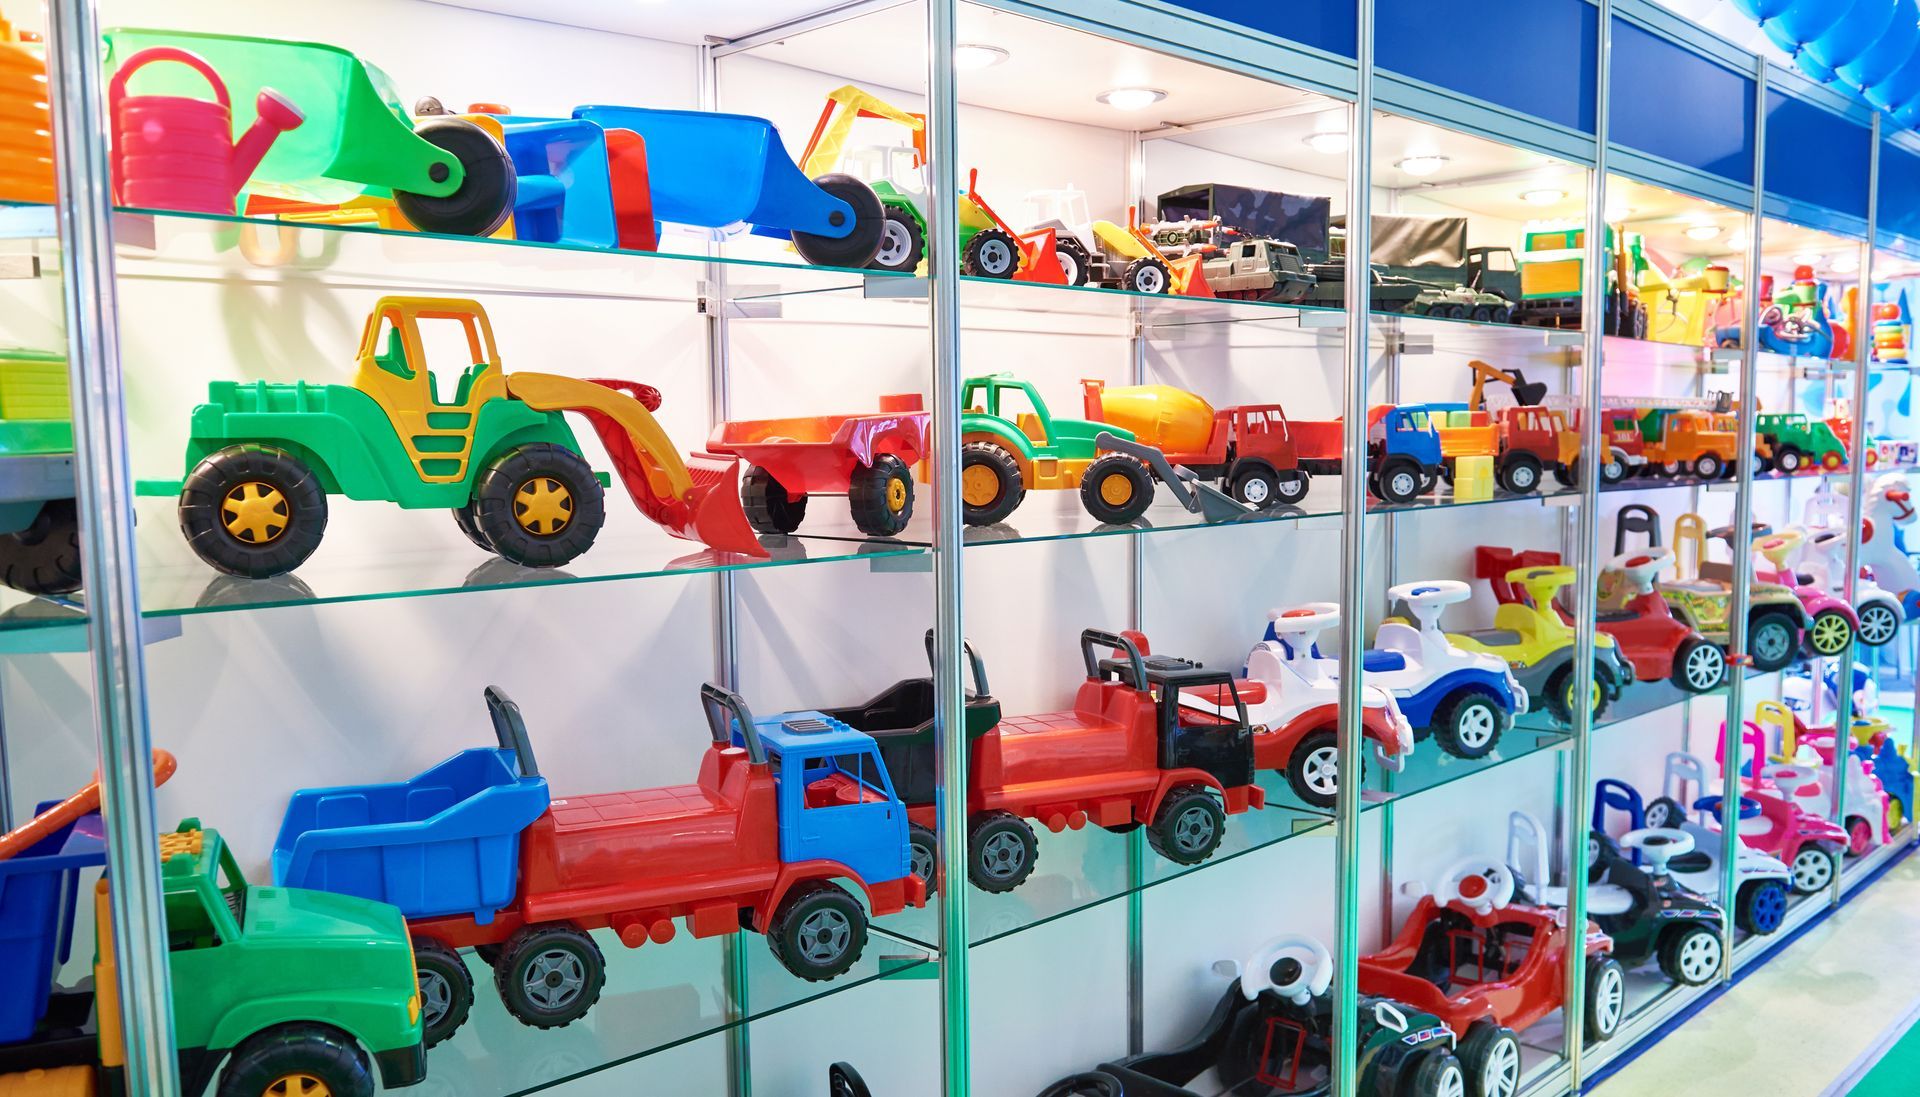 Toy Fulfillment: 3 Supply Chain Strategies to Consider